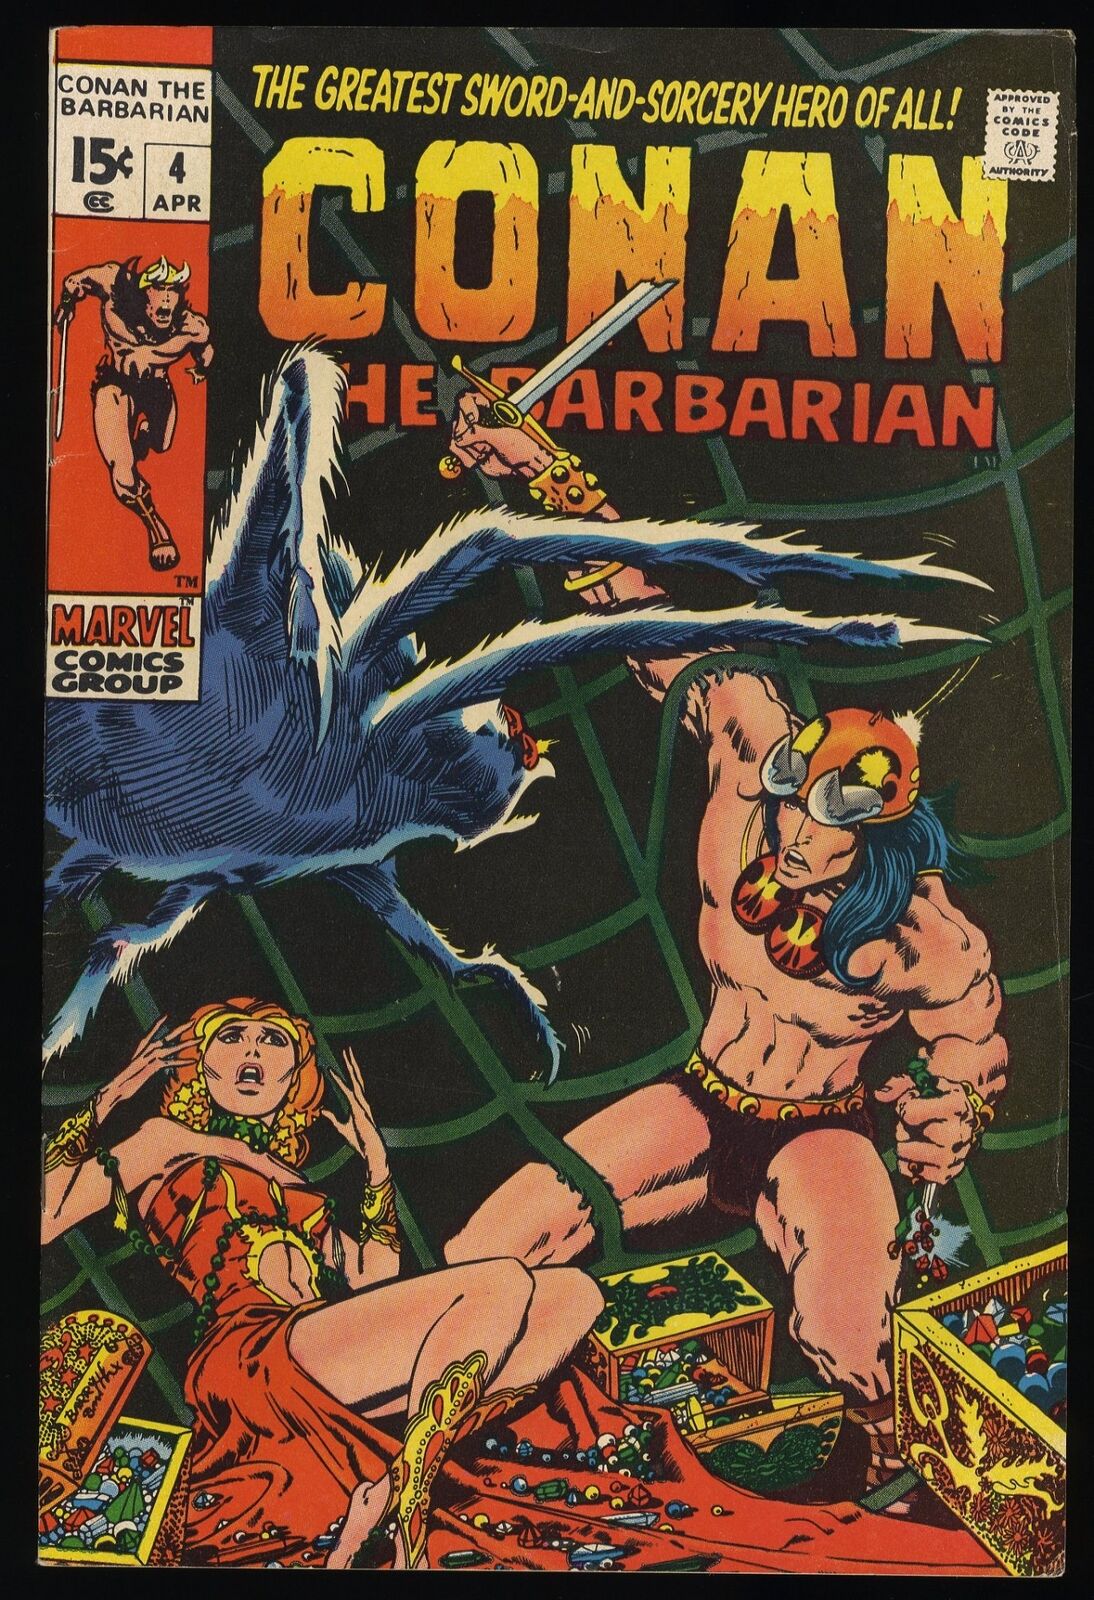 Conan The Barbarian #4 FN/VF 7.0 Barry Windsor-Smith Tower of the Elephant